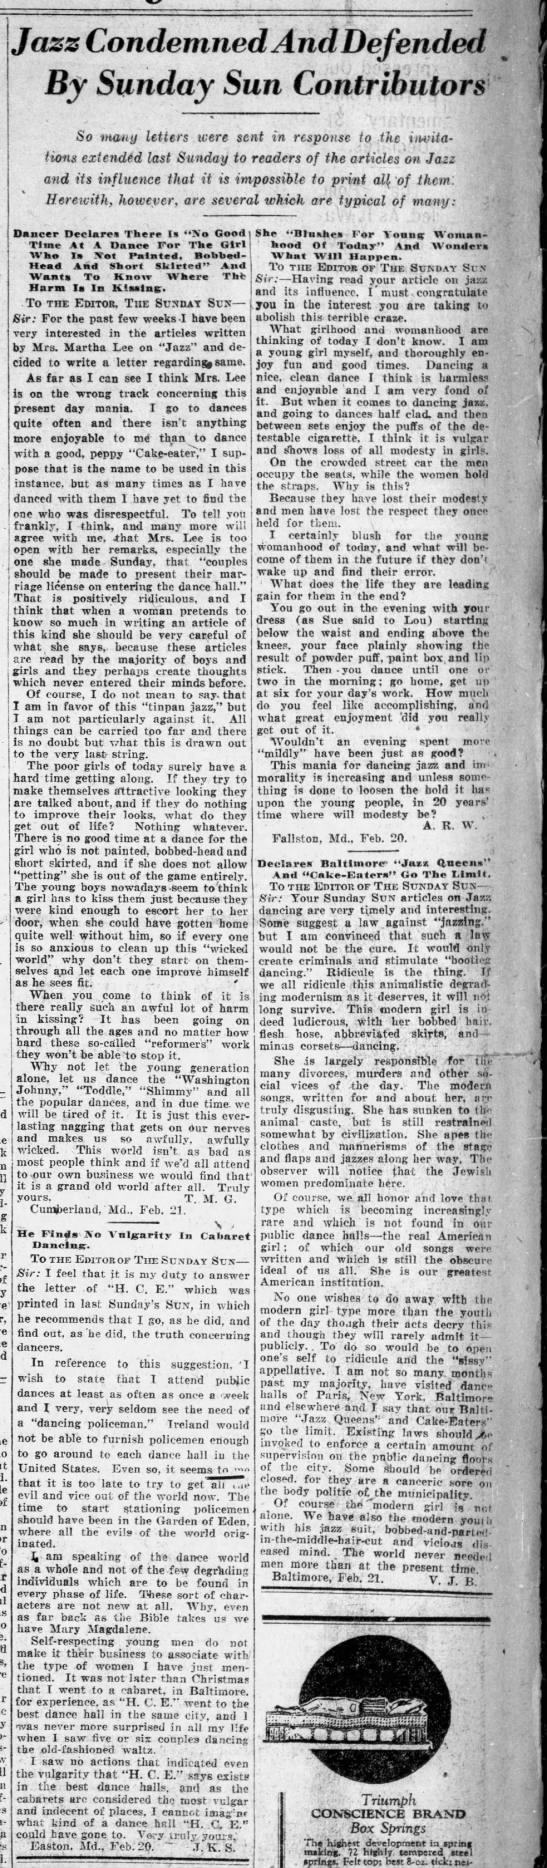 Letters to the editor express pro and con opinions about jazz music in 1922 - 